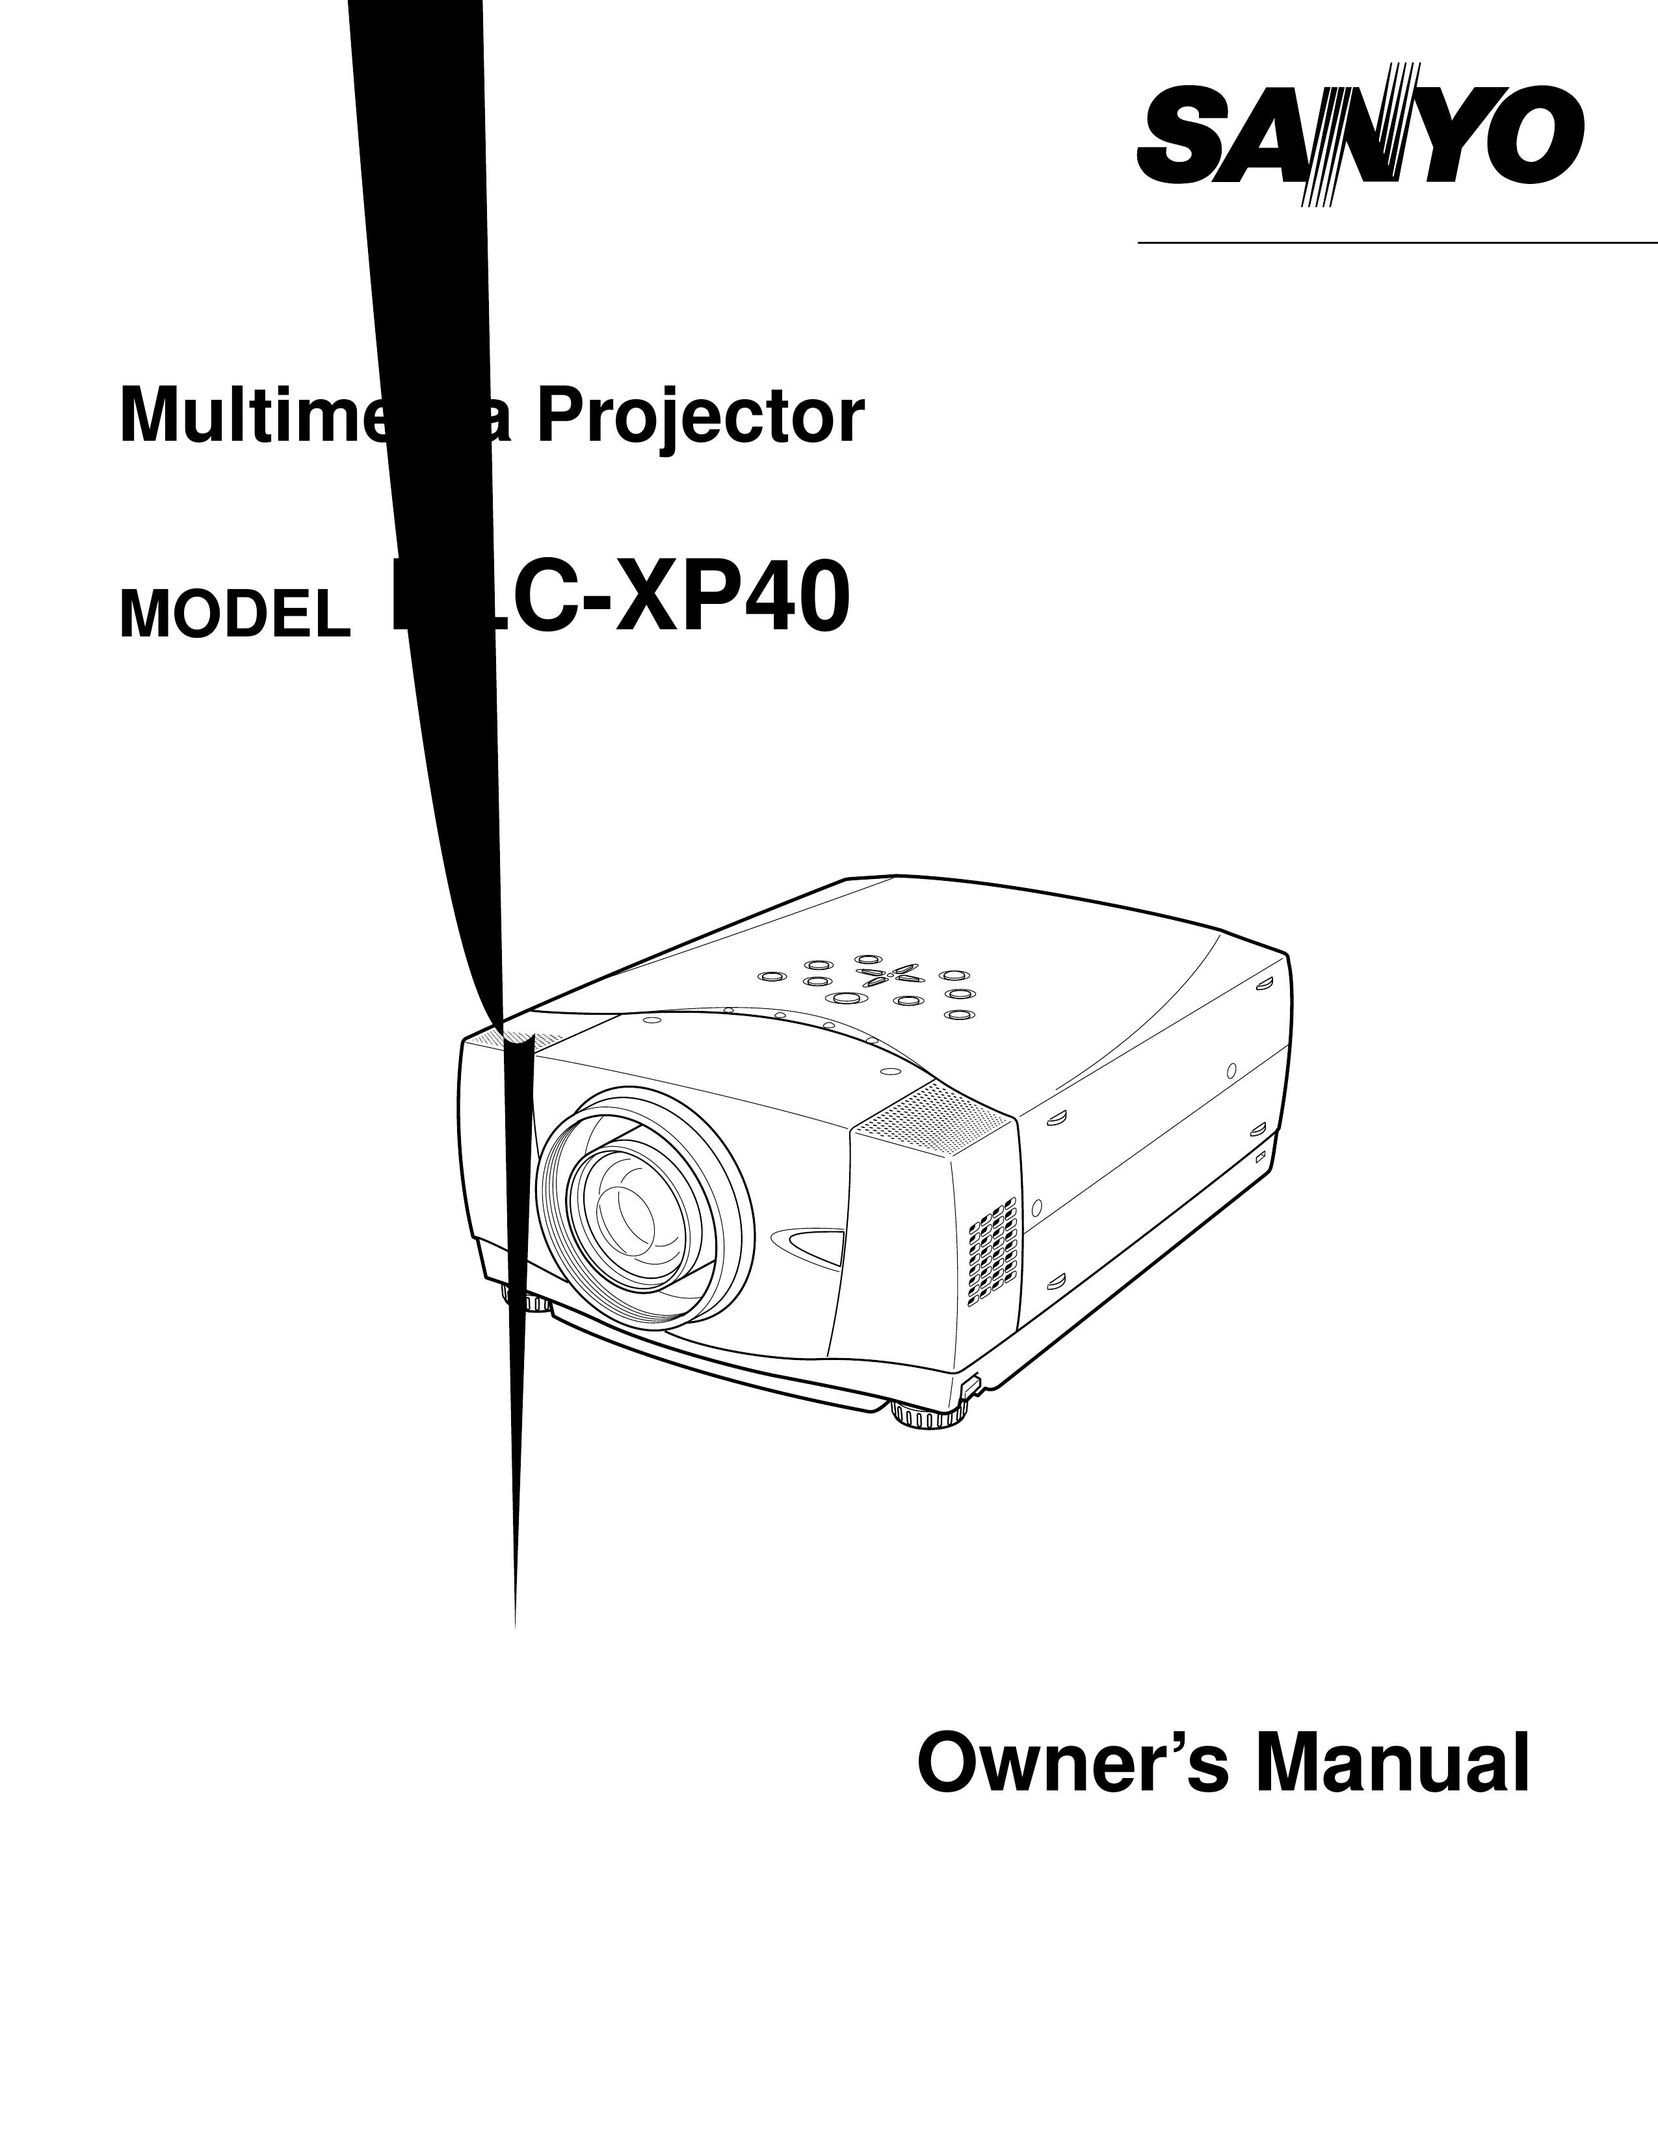 Fisher PLC-XP40 Projector User Manual